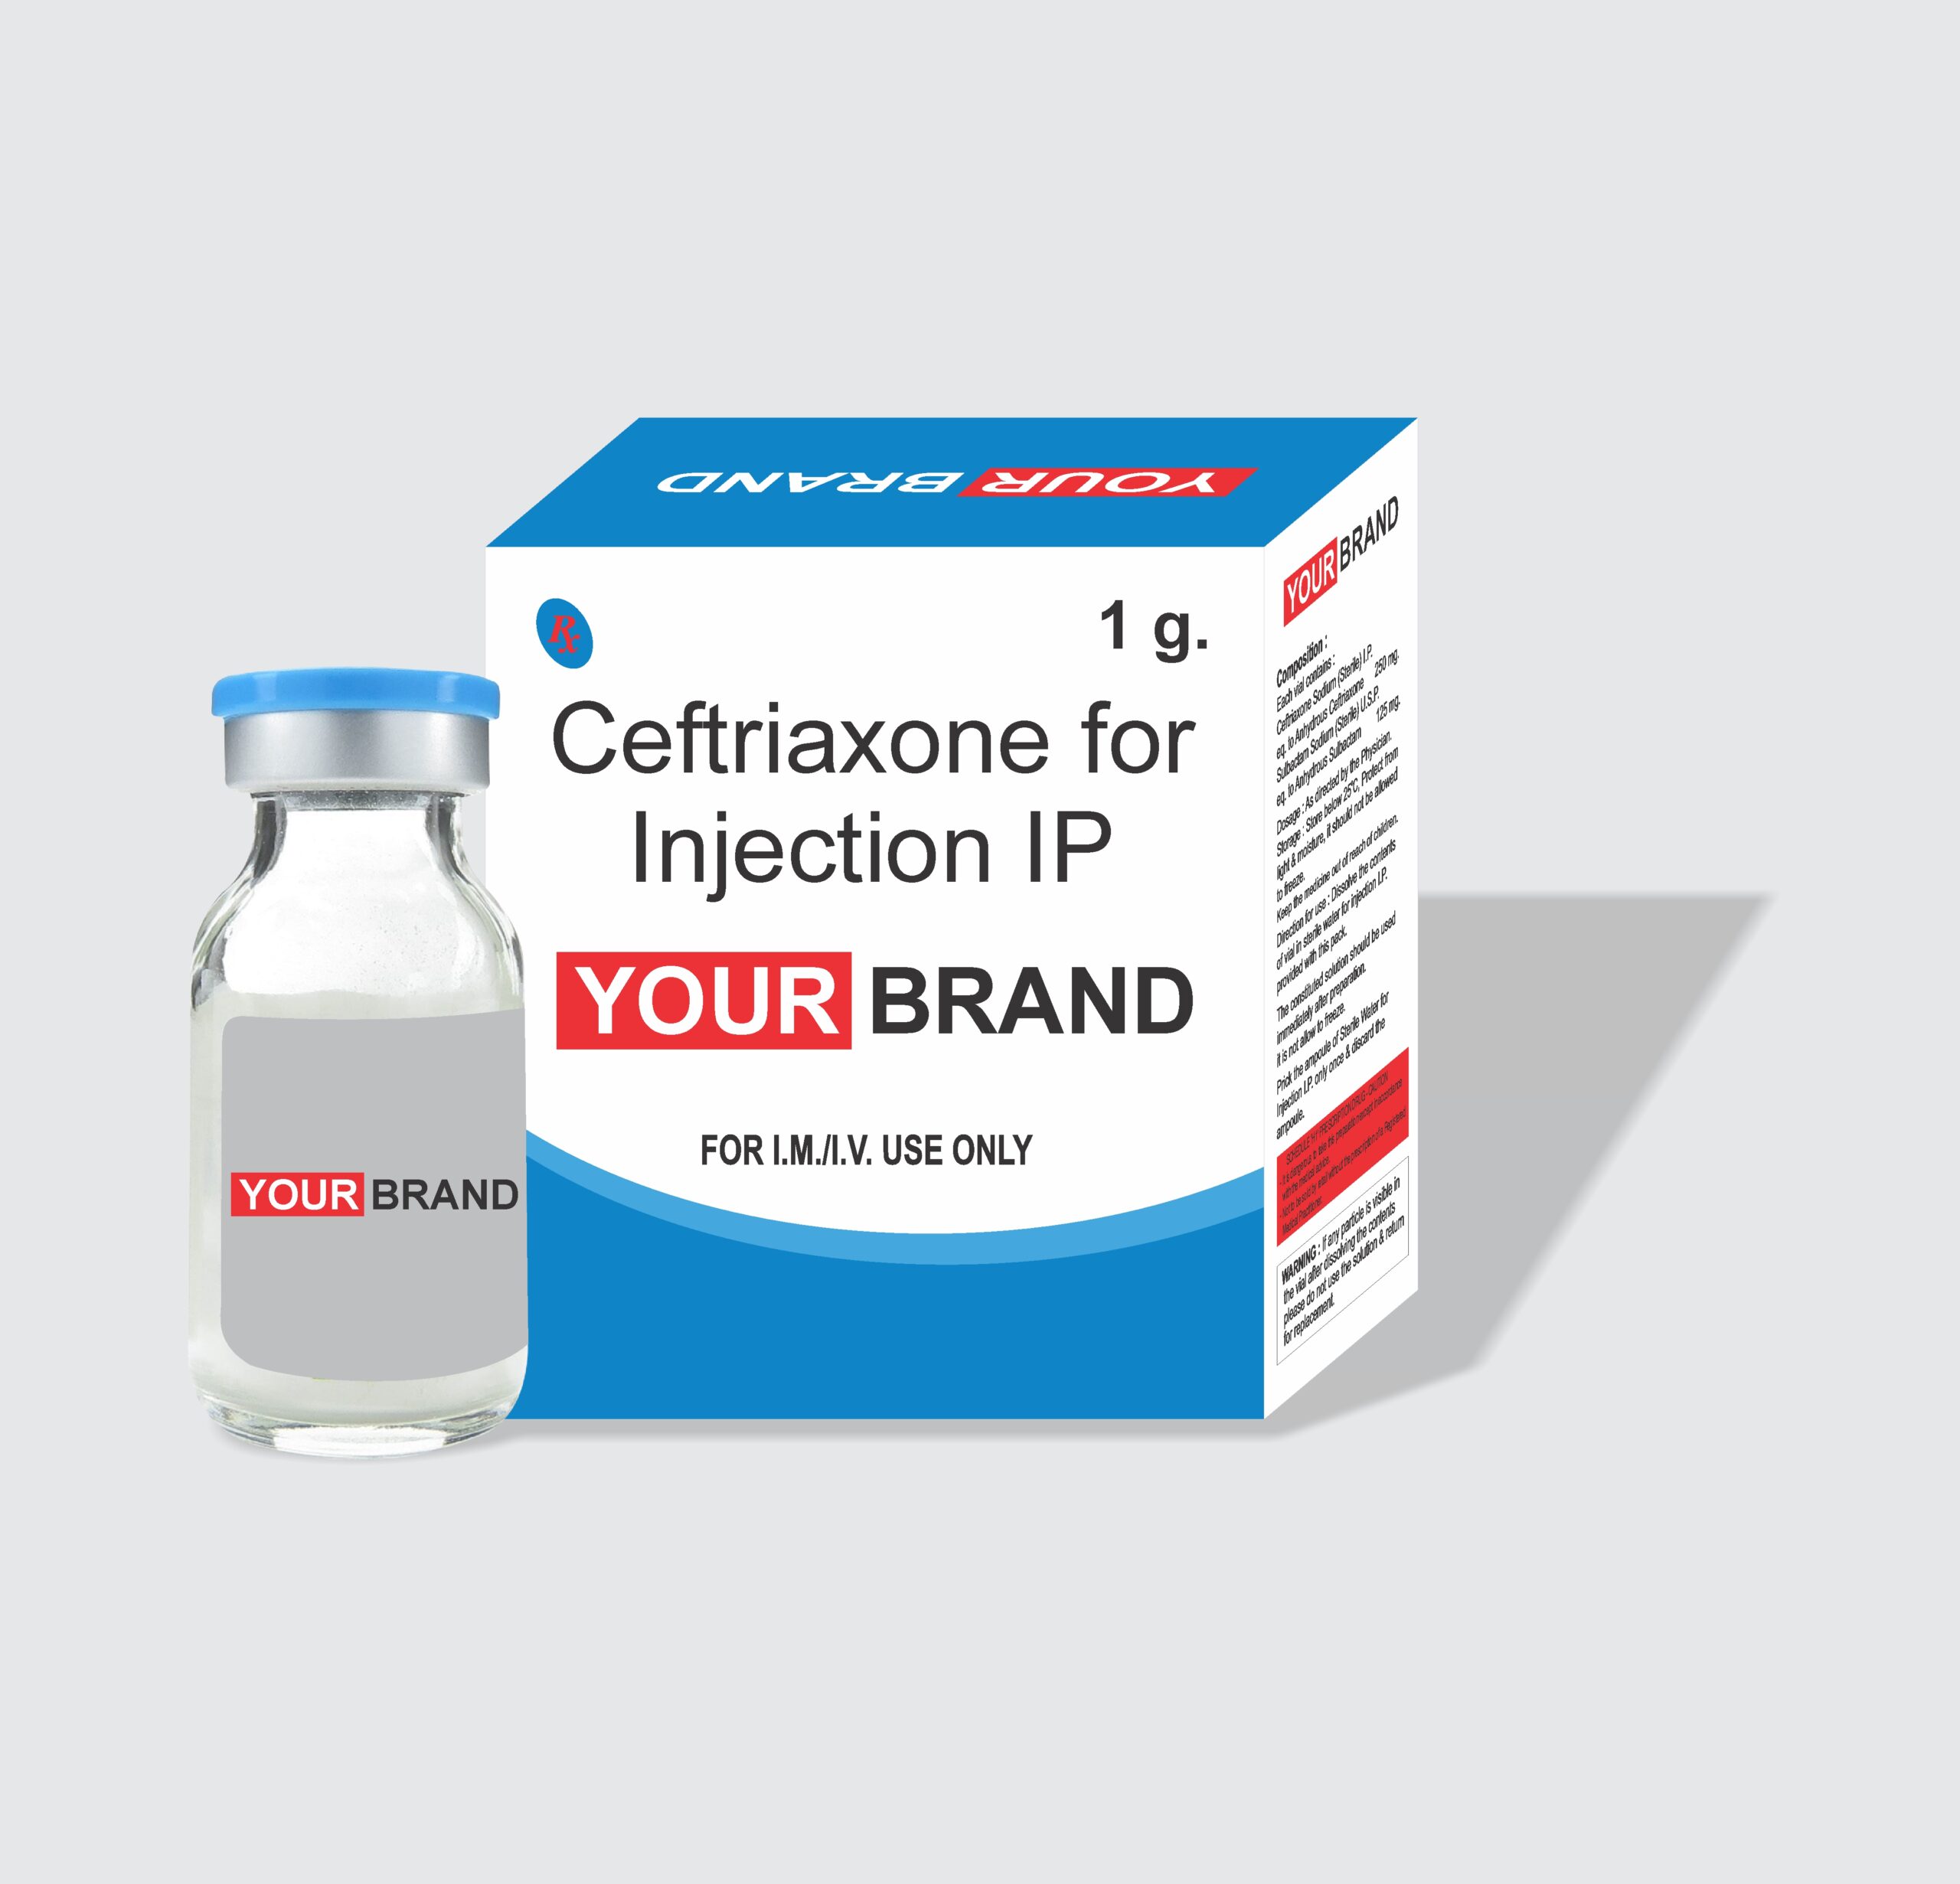 CEFTRIAXONE FOR INJECTION